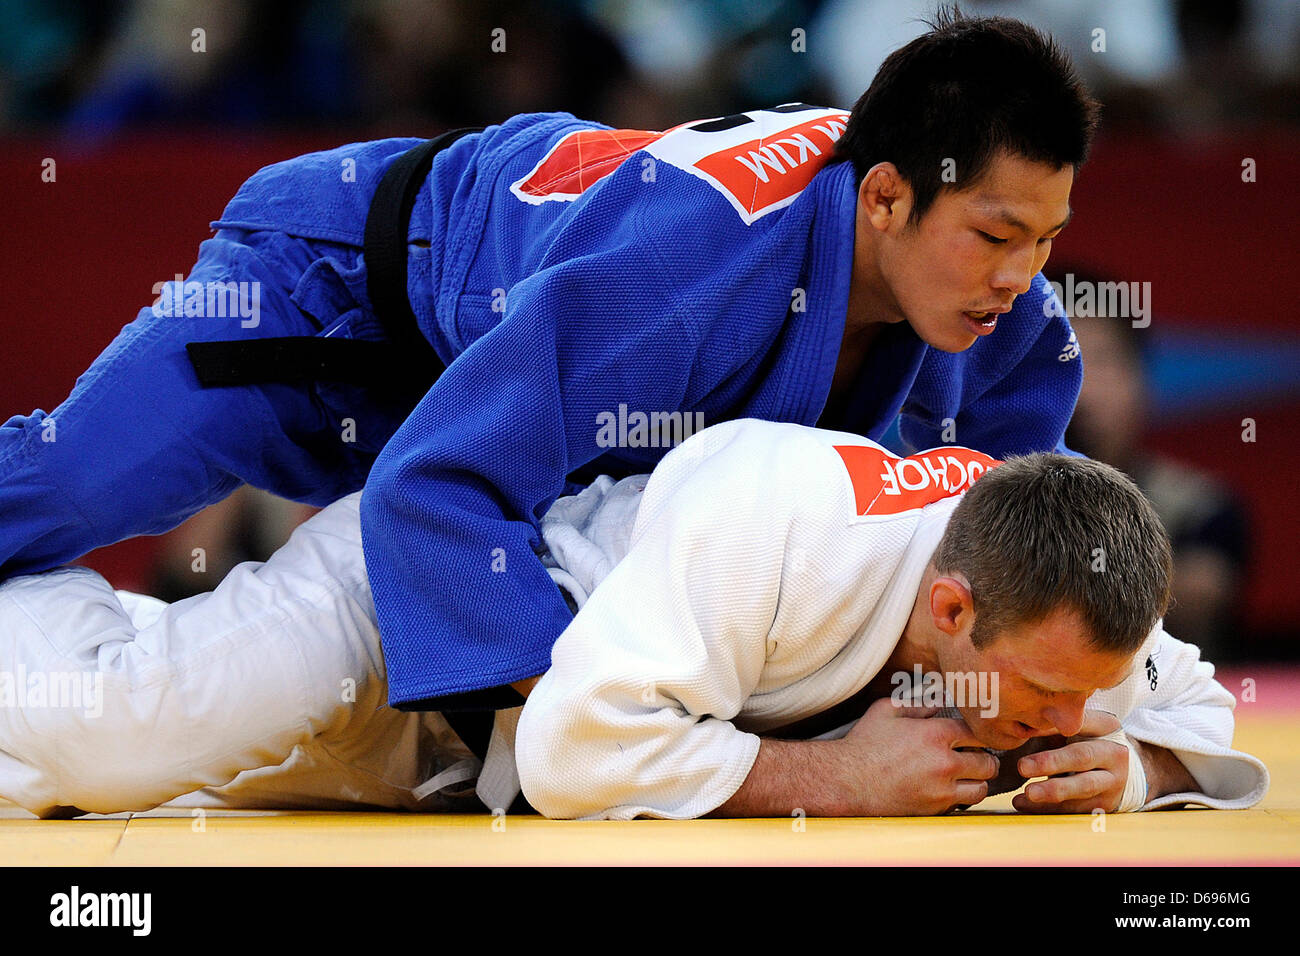 Germany's judoka Ole Bischof (bottom) and Kim Jae-Bum of South Korea in the final of the Men's -81kg judo event against in the ExCeL Arena at the London 2012 Olympic Games, London, Great Britain, 31 July 2012. Photo: Marius Becker dpa  +++(c) dpa - Bildfunk+++ Stock Photo